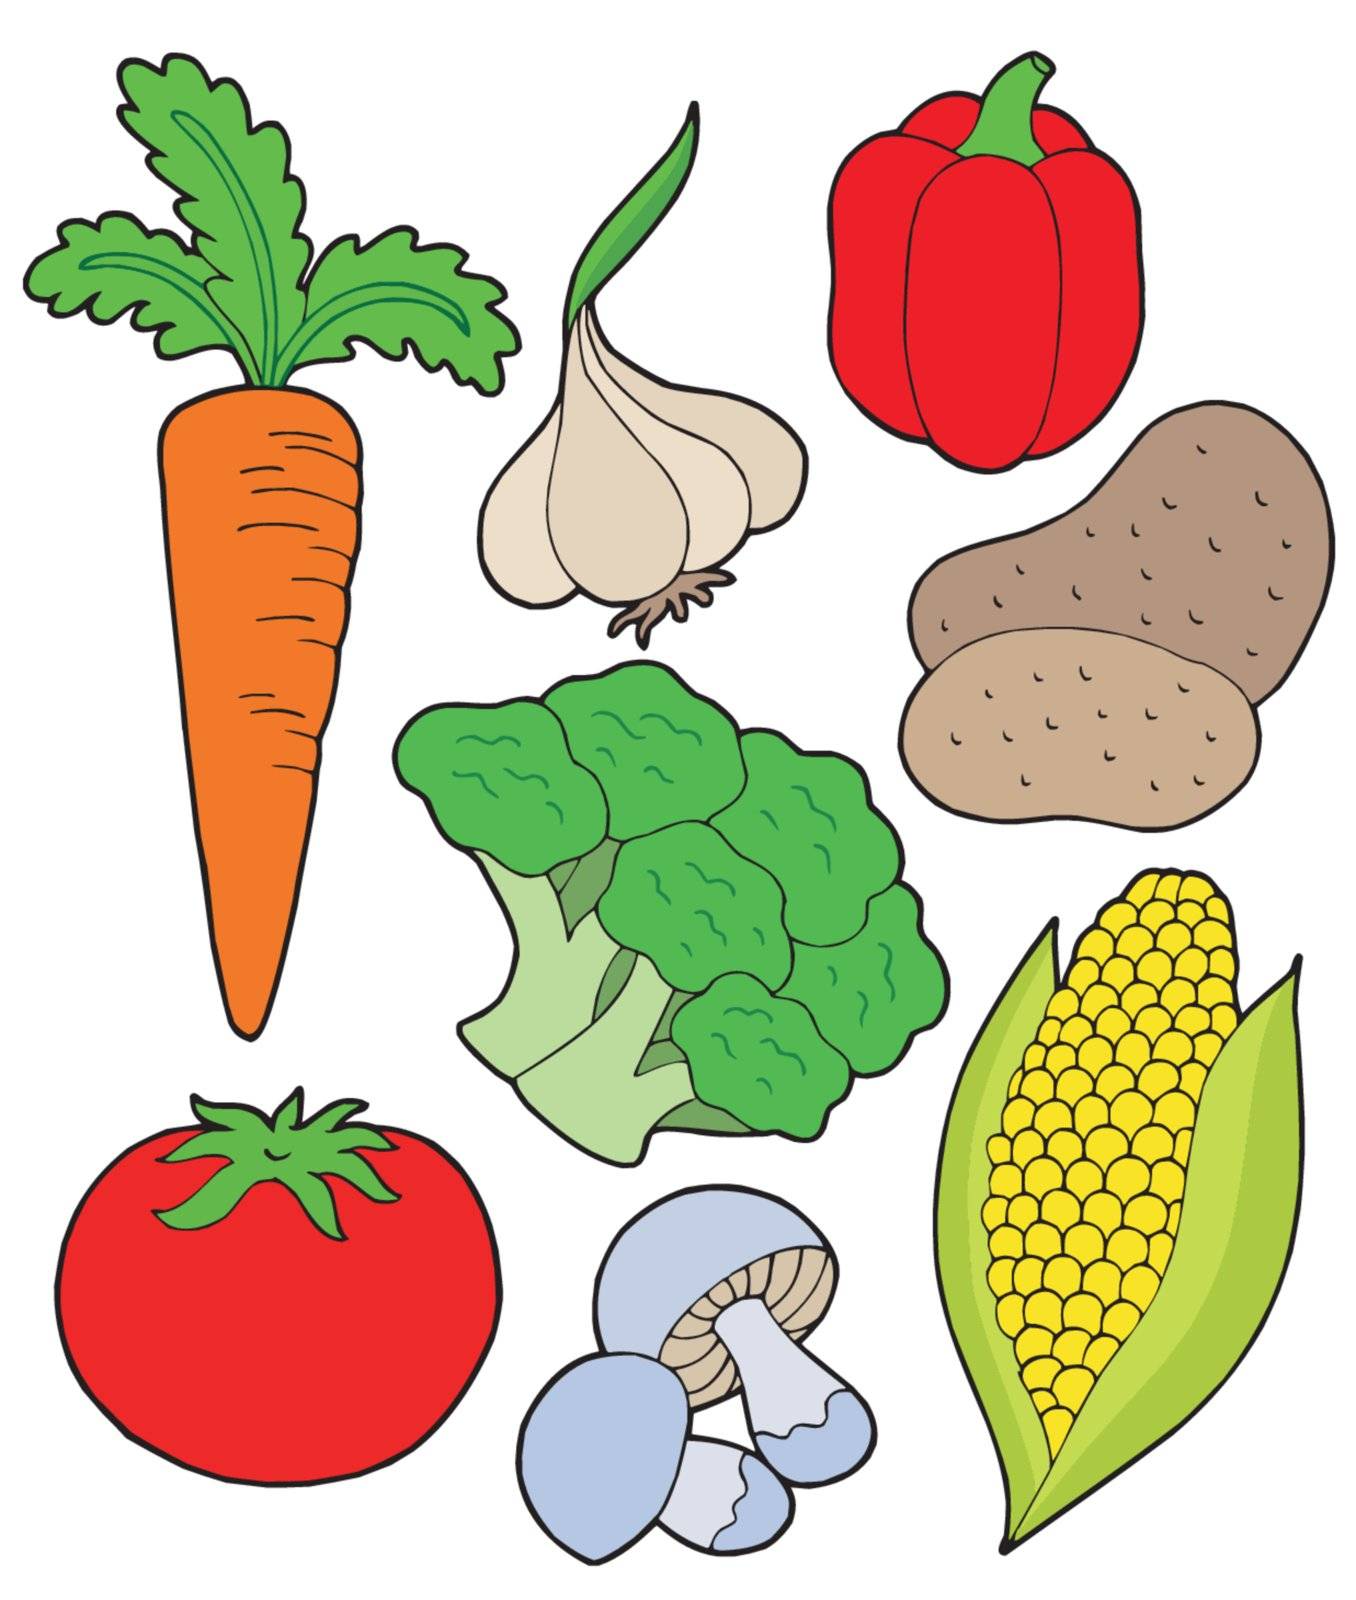 Vegetable collection on white background - vector illustration.